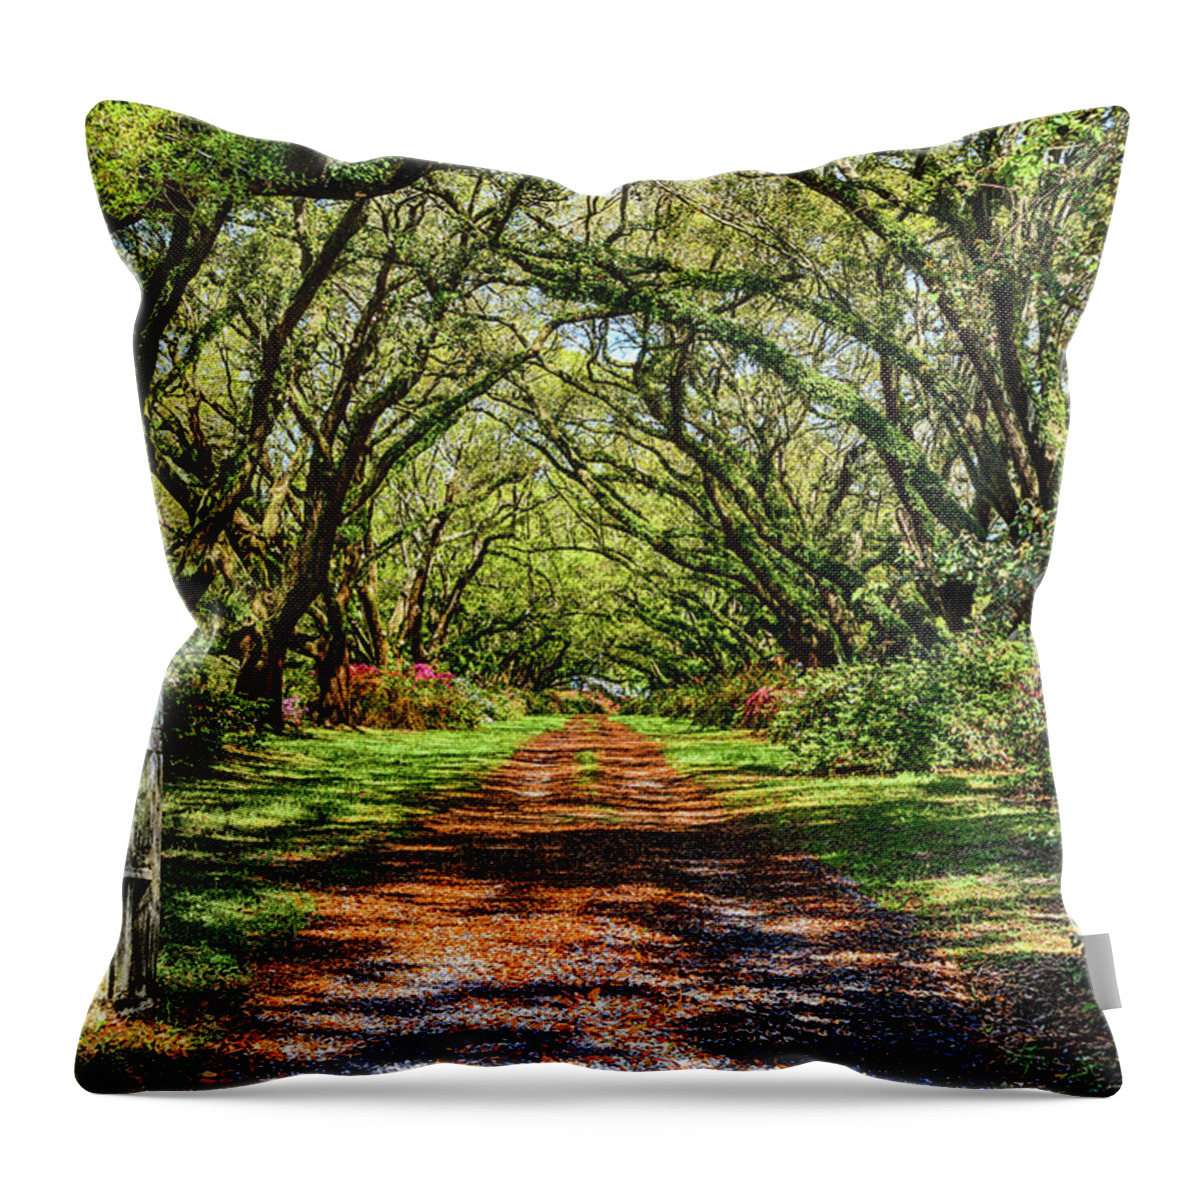  Throw Pillow featuring the photograph Arrogantly Shabby by Jim Miller